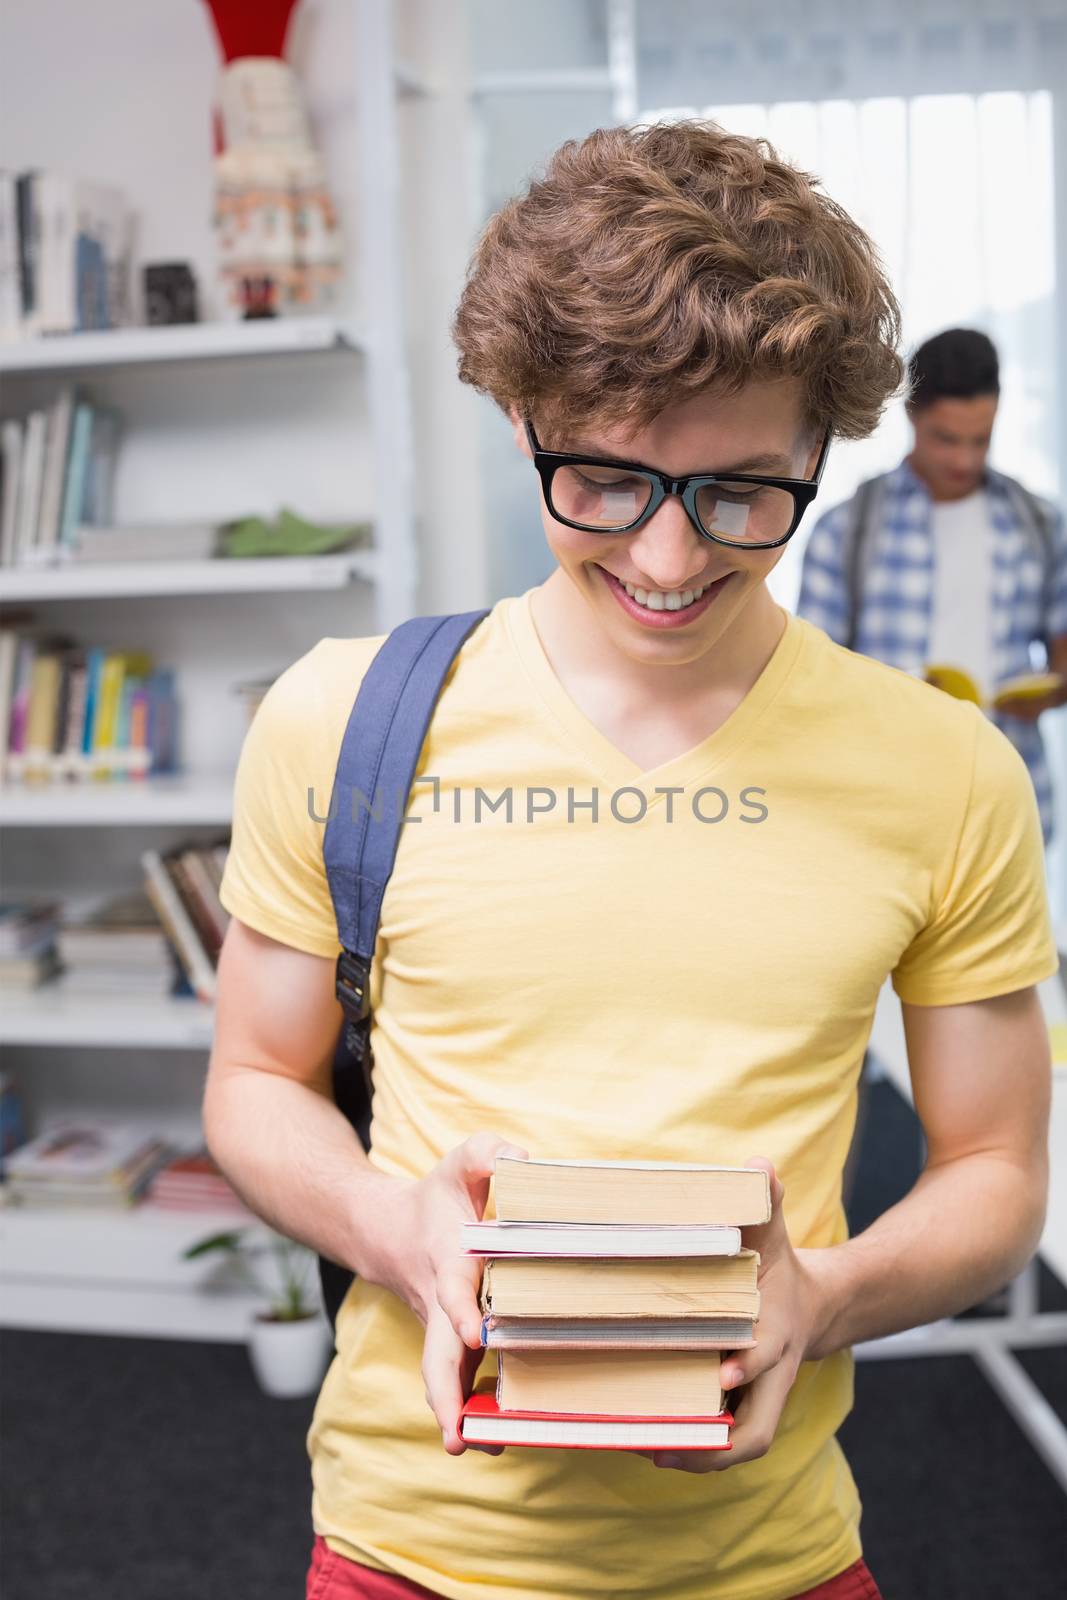 Students carrying small pile of books at the college